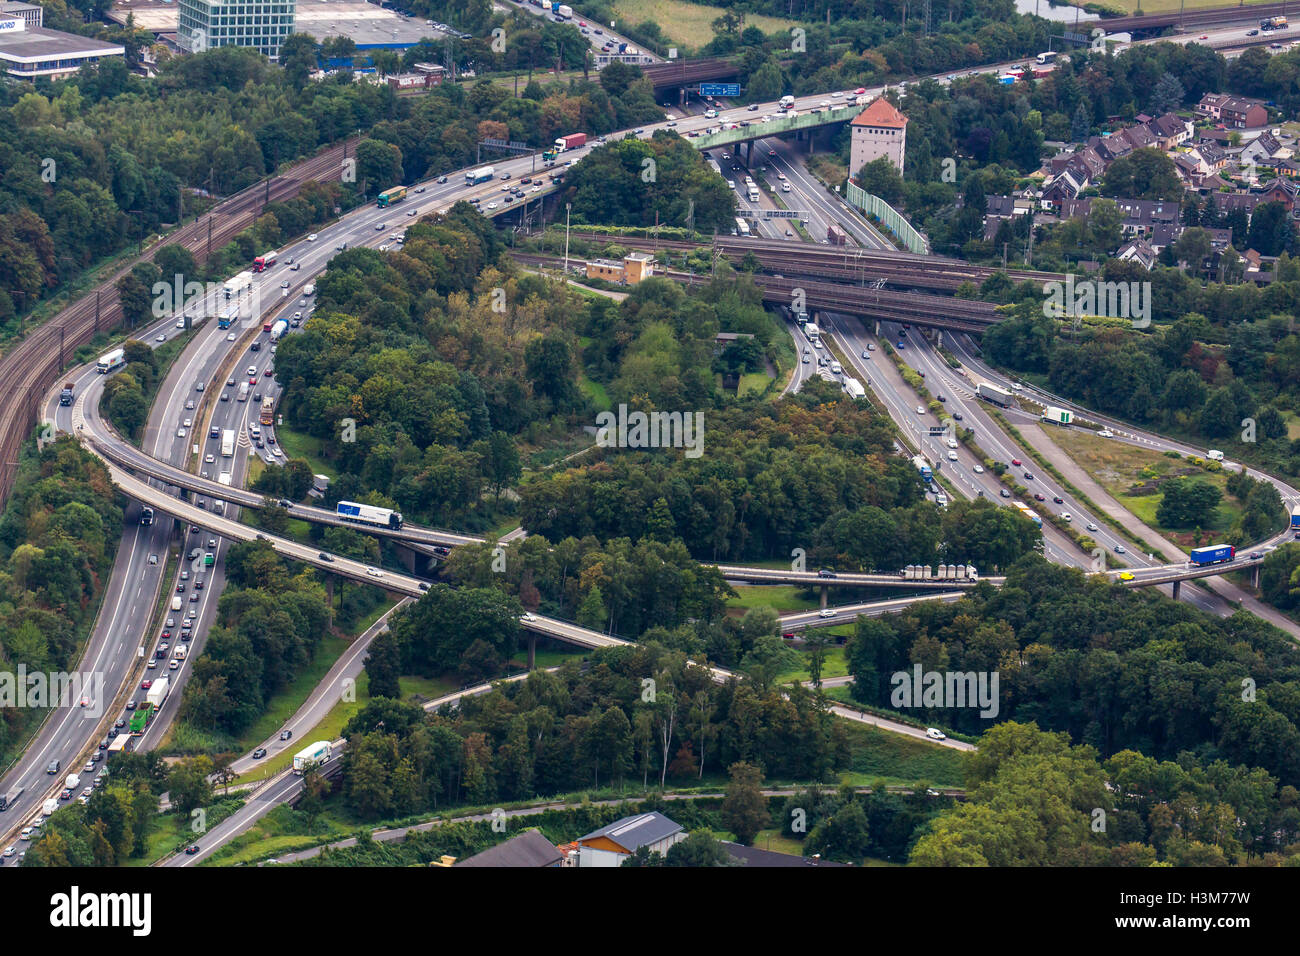 Areal view of Autobahn motorway junction, of highway A3 and A40, Duisburg, Germany Stock Photo